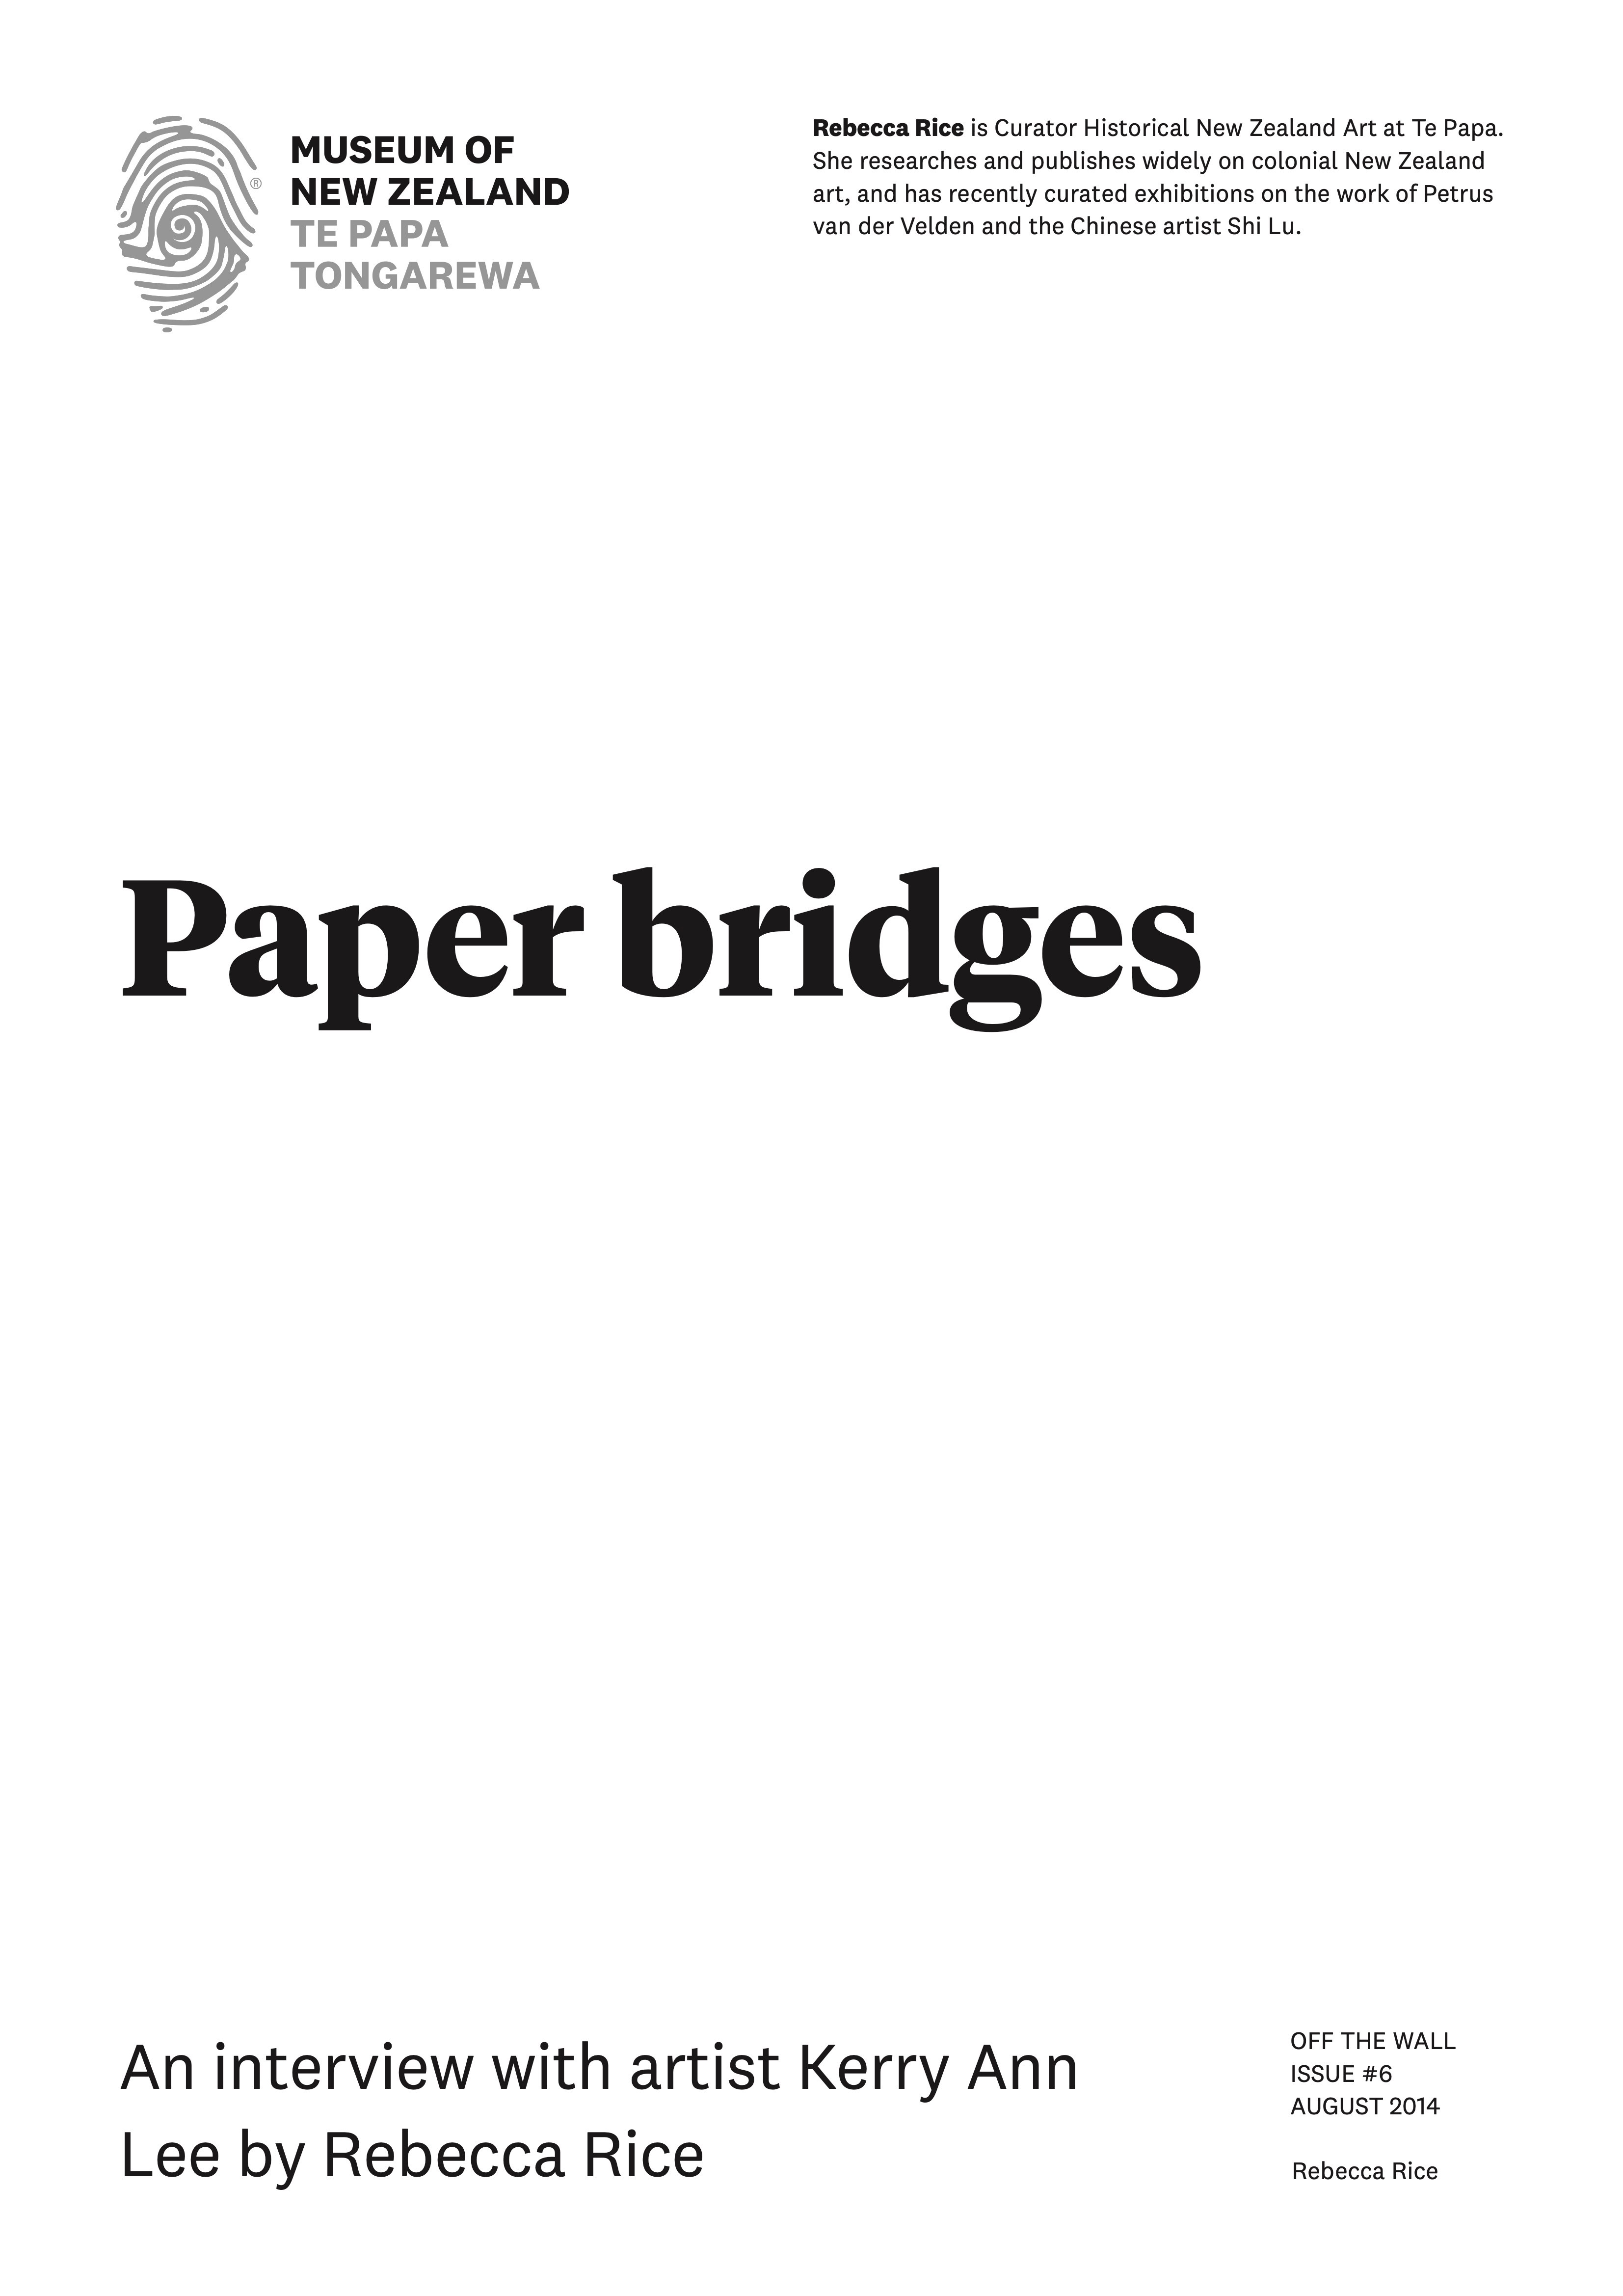 Cover page of 'Paper bridges' interview with Kerry Ann Lee 